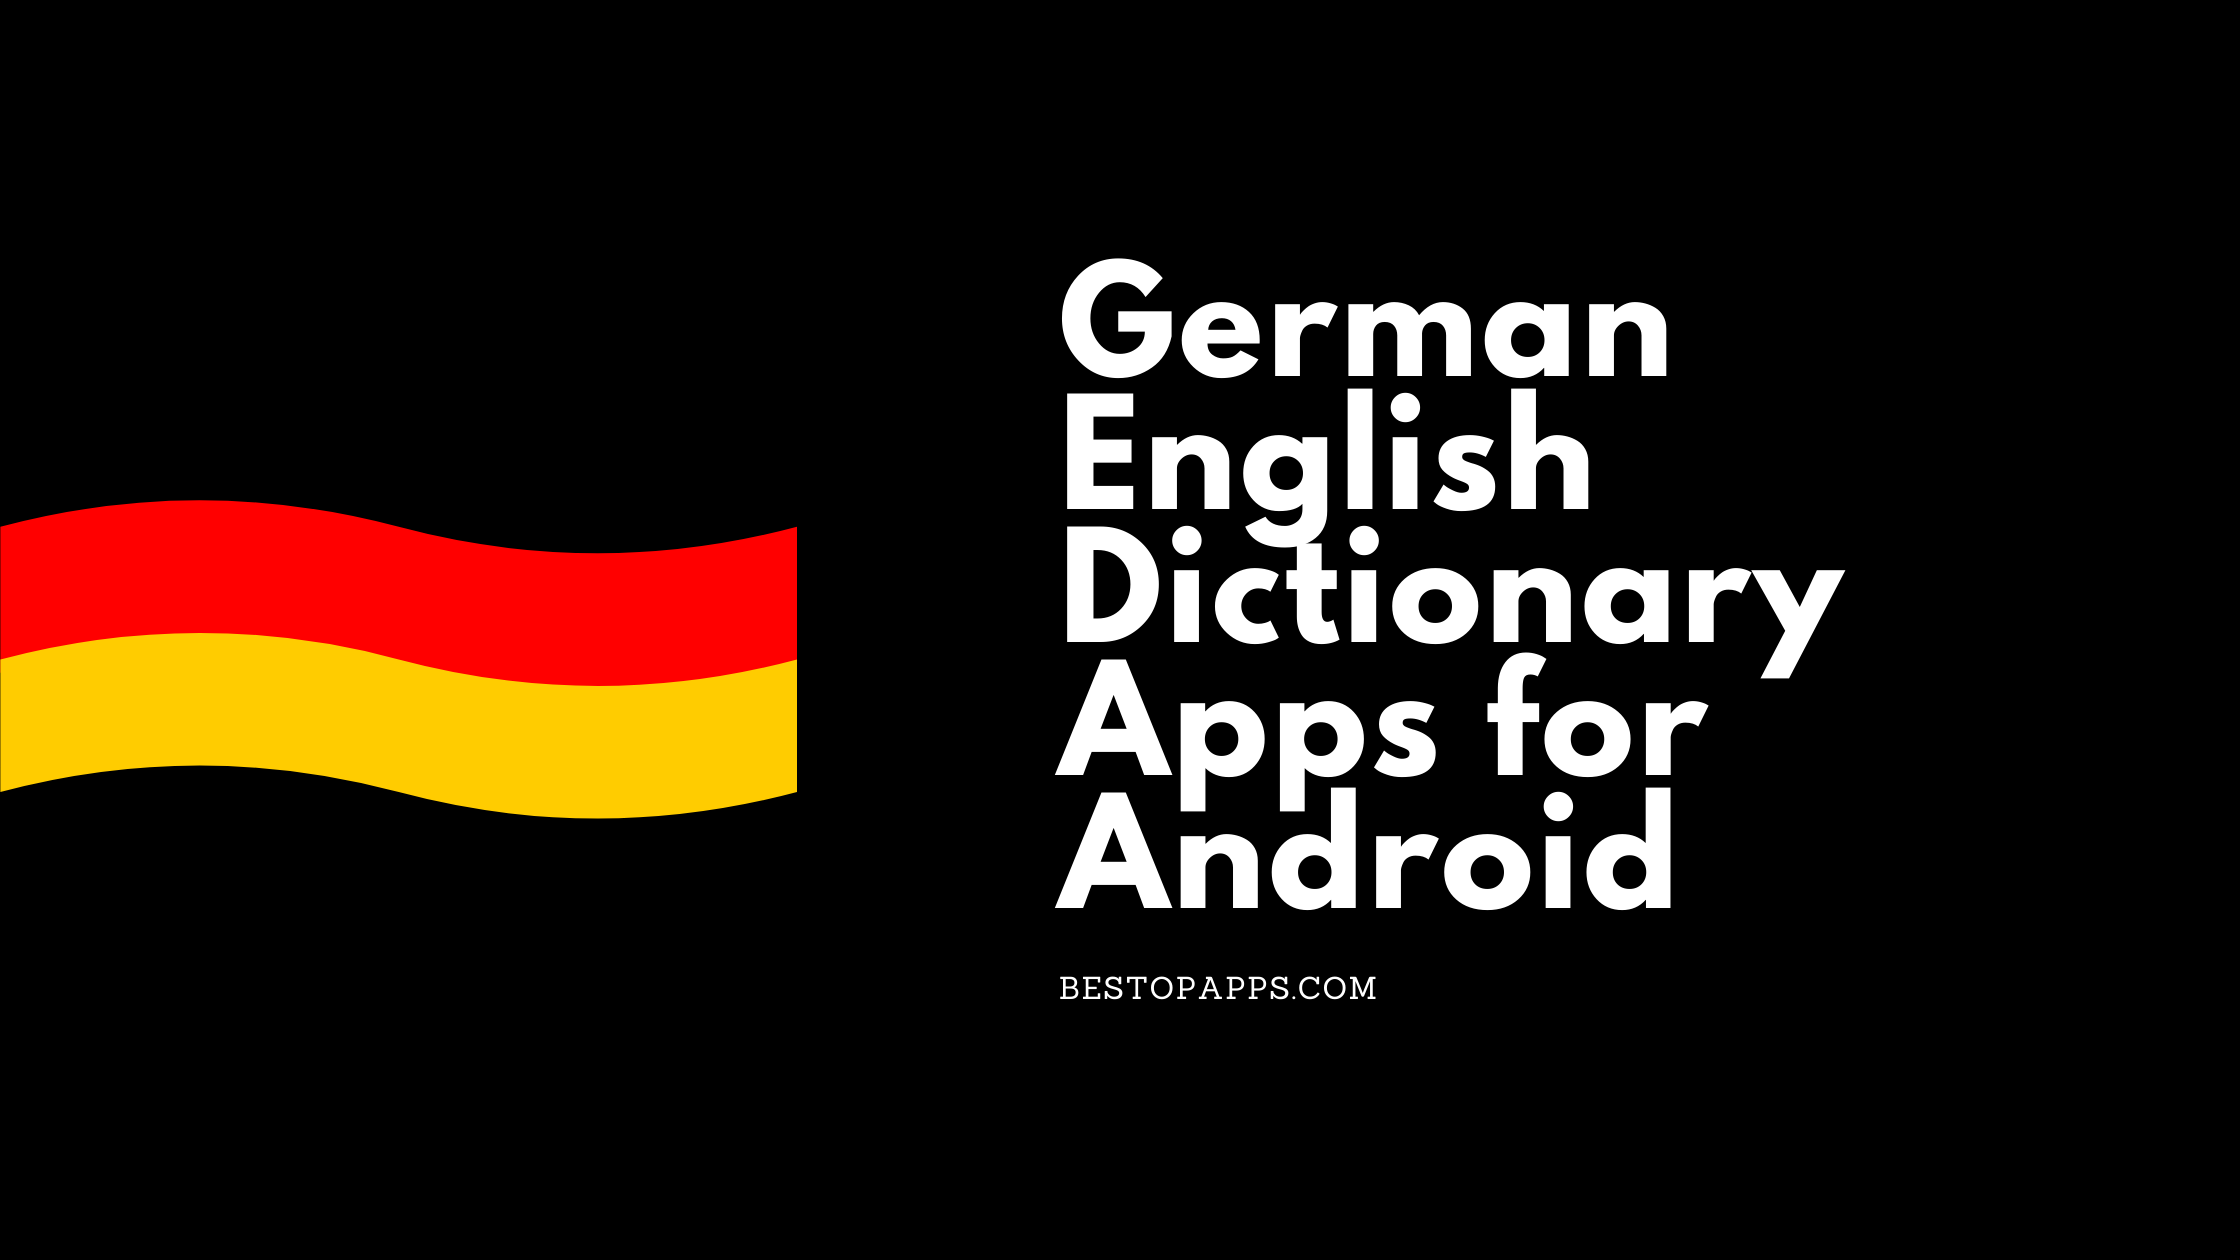 German English Dictionary Apps for Android